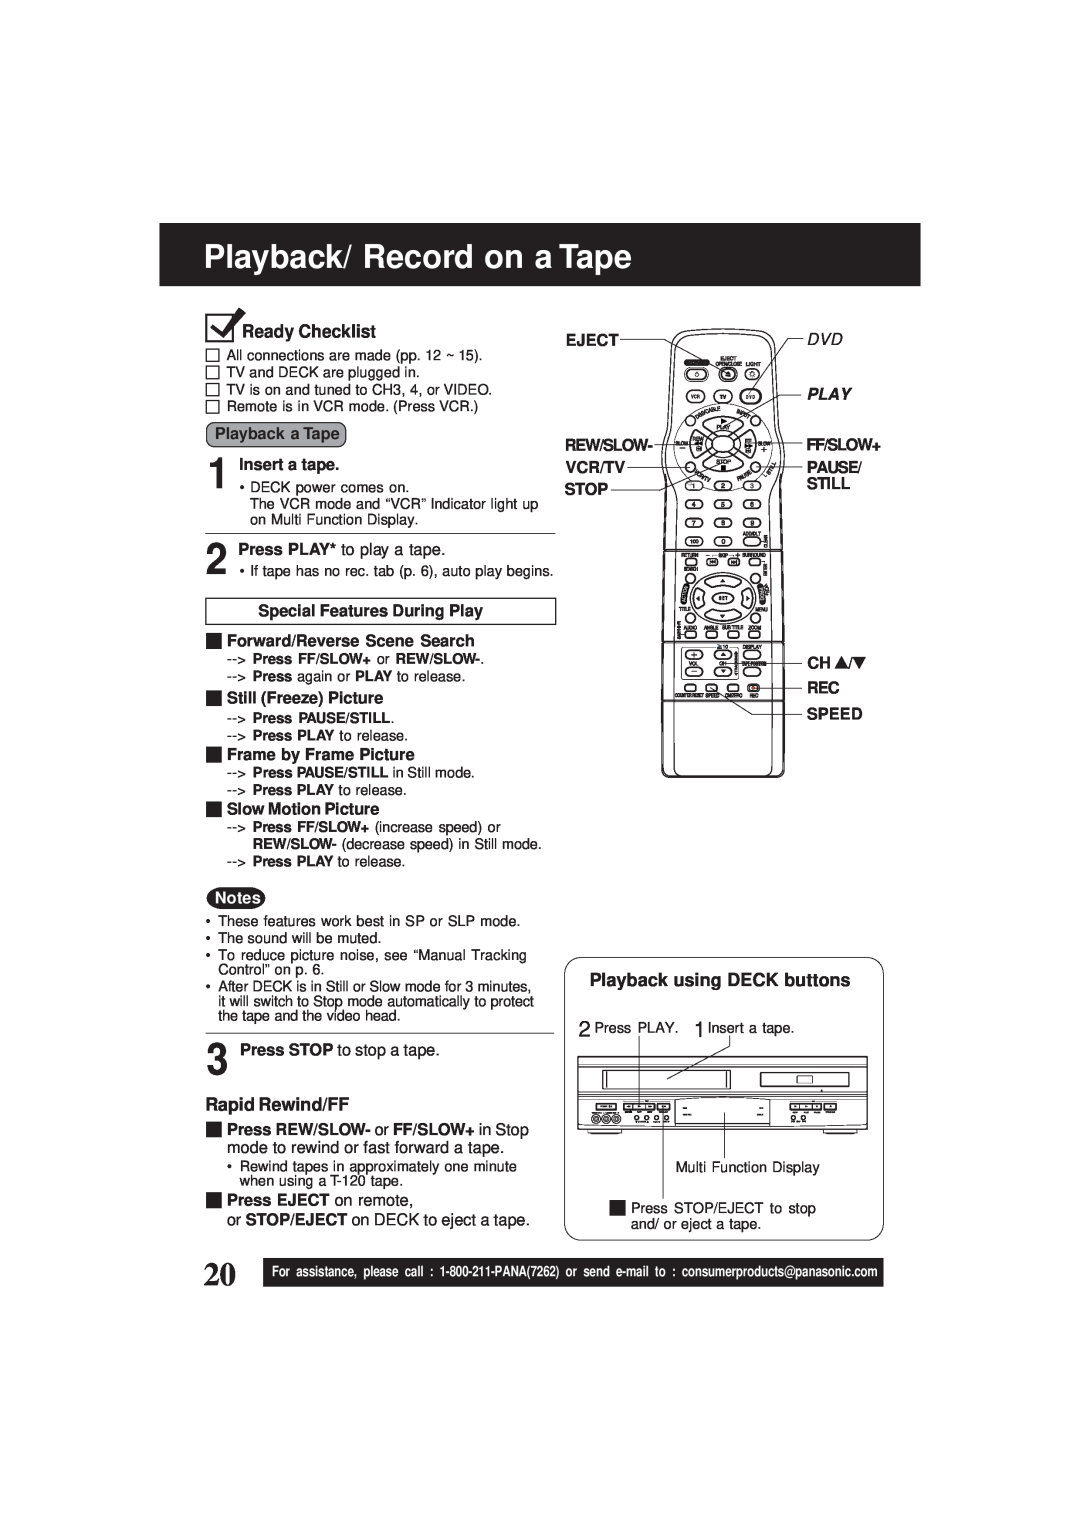 Panasonic PV-D4761 Playback/ Record on a Tape, Ready Checklist, Rapid Rewind/FF, Playback using DECK buttons, Eject 